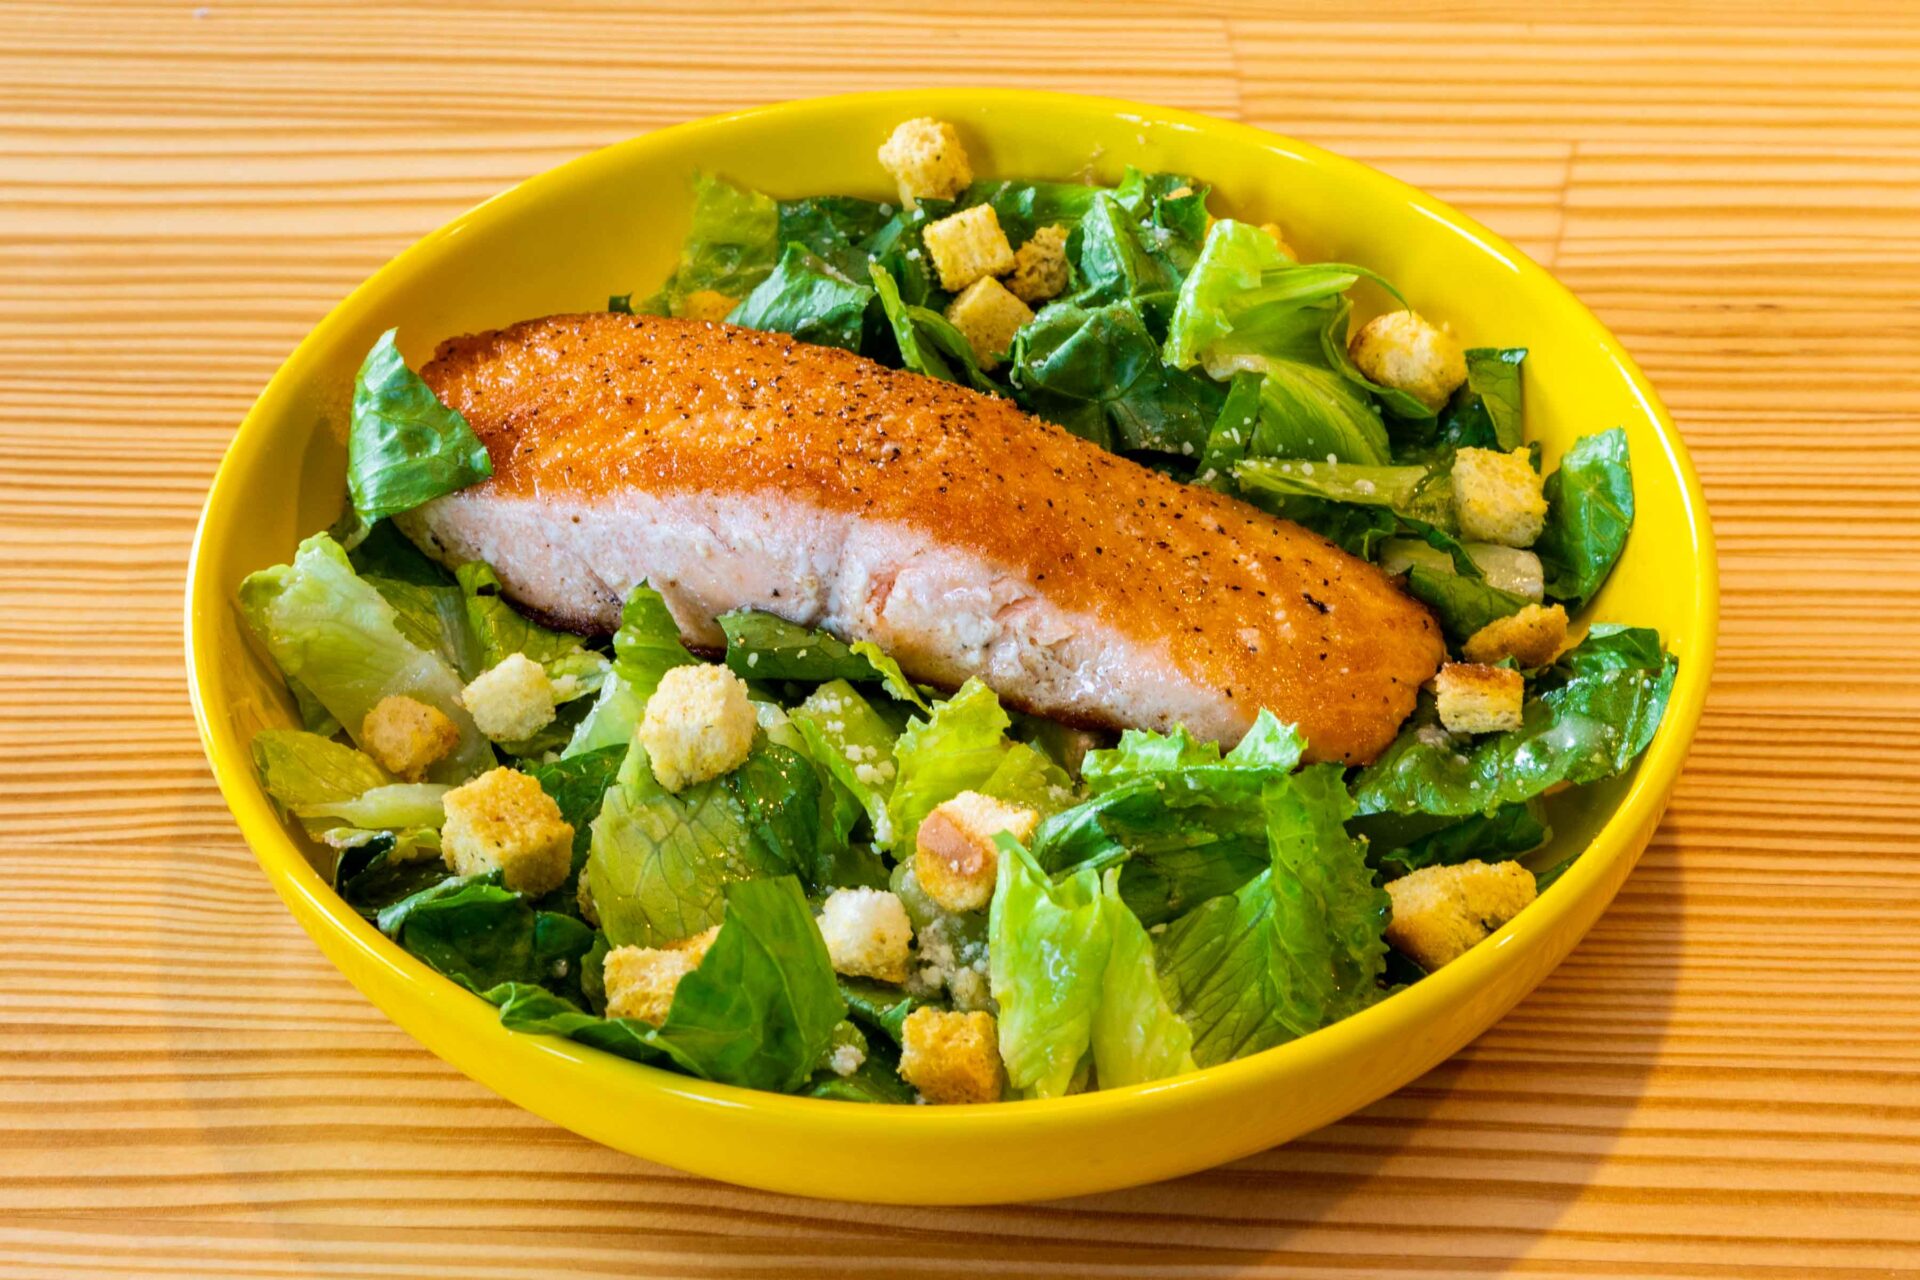 A bowl of salad with chicken and corn.